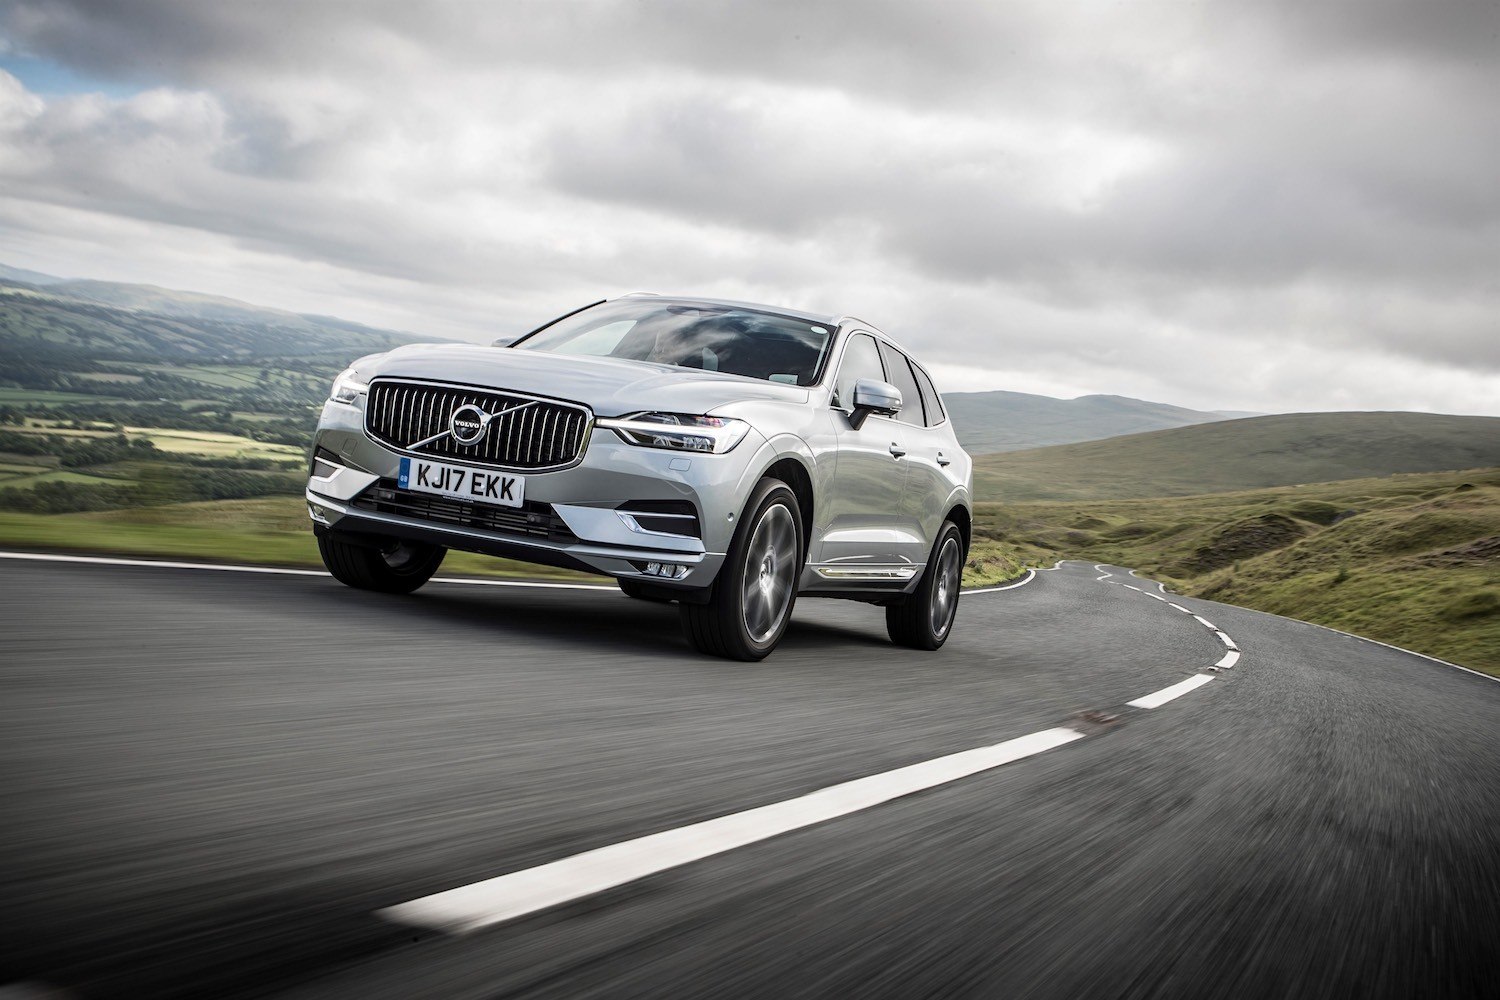 Neil Lyndon reviews the All New Volvo XC60 for Drive 11